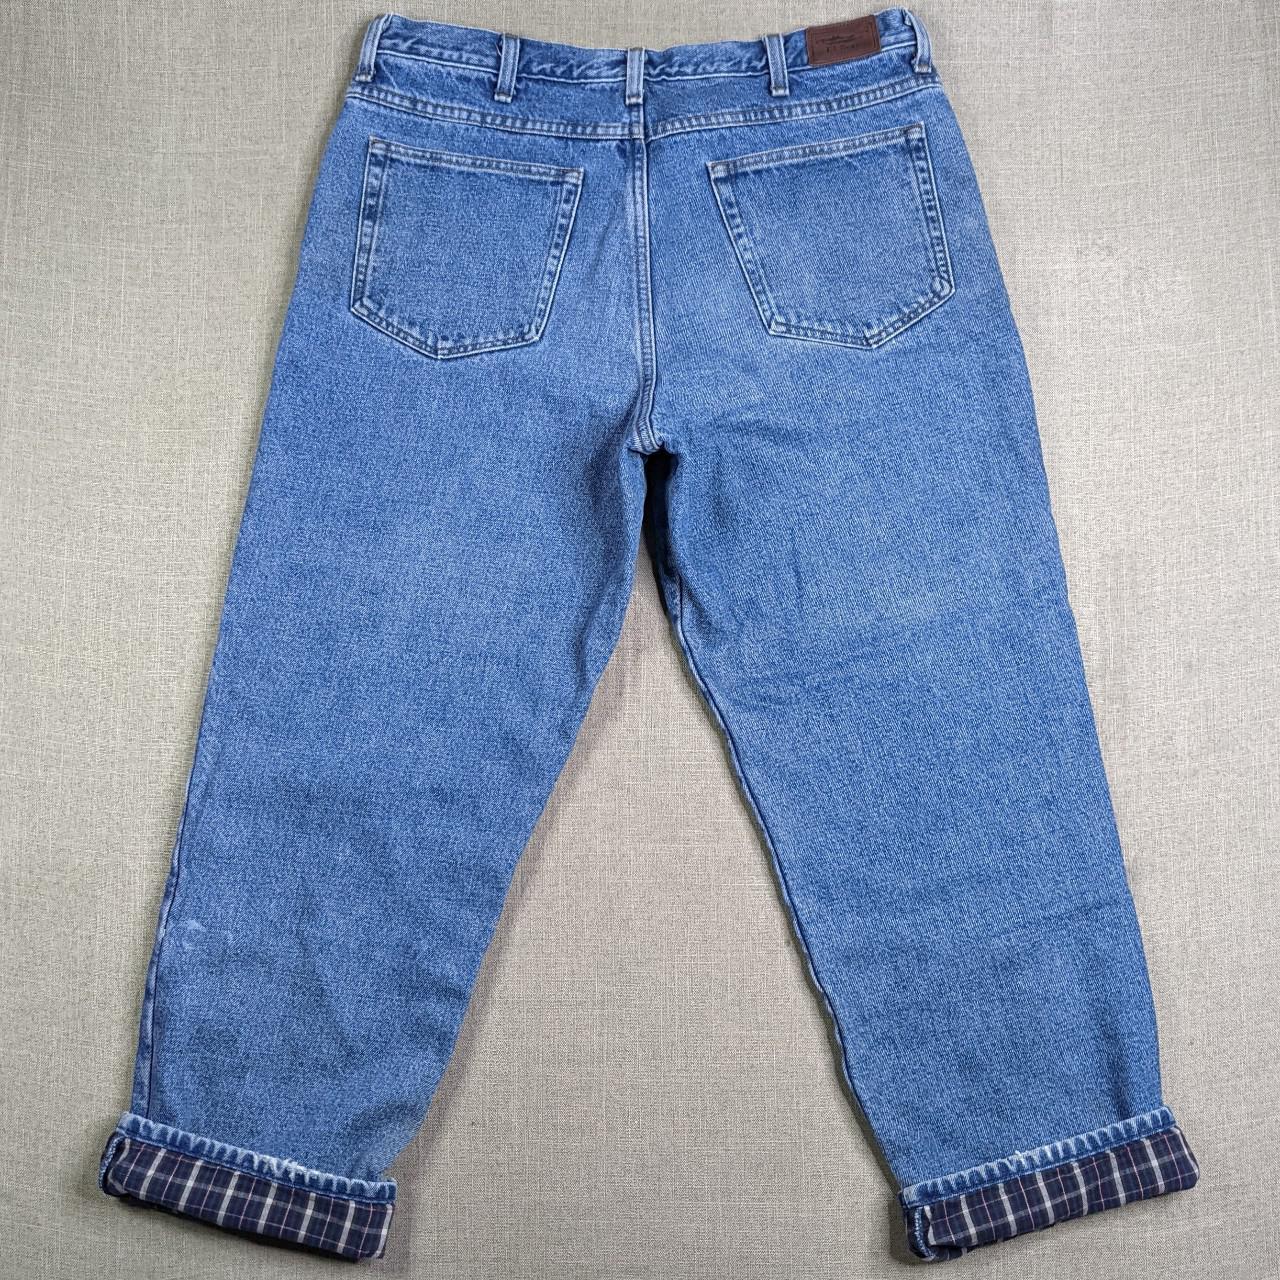 Product Image 2 - Vintage flannel lined jeans by